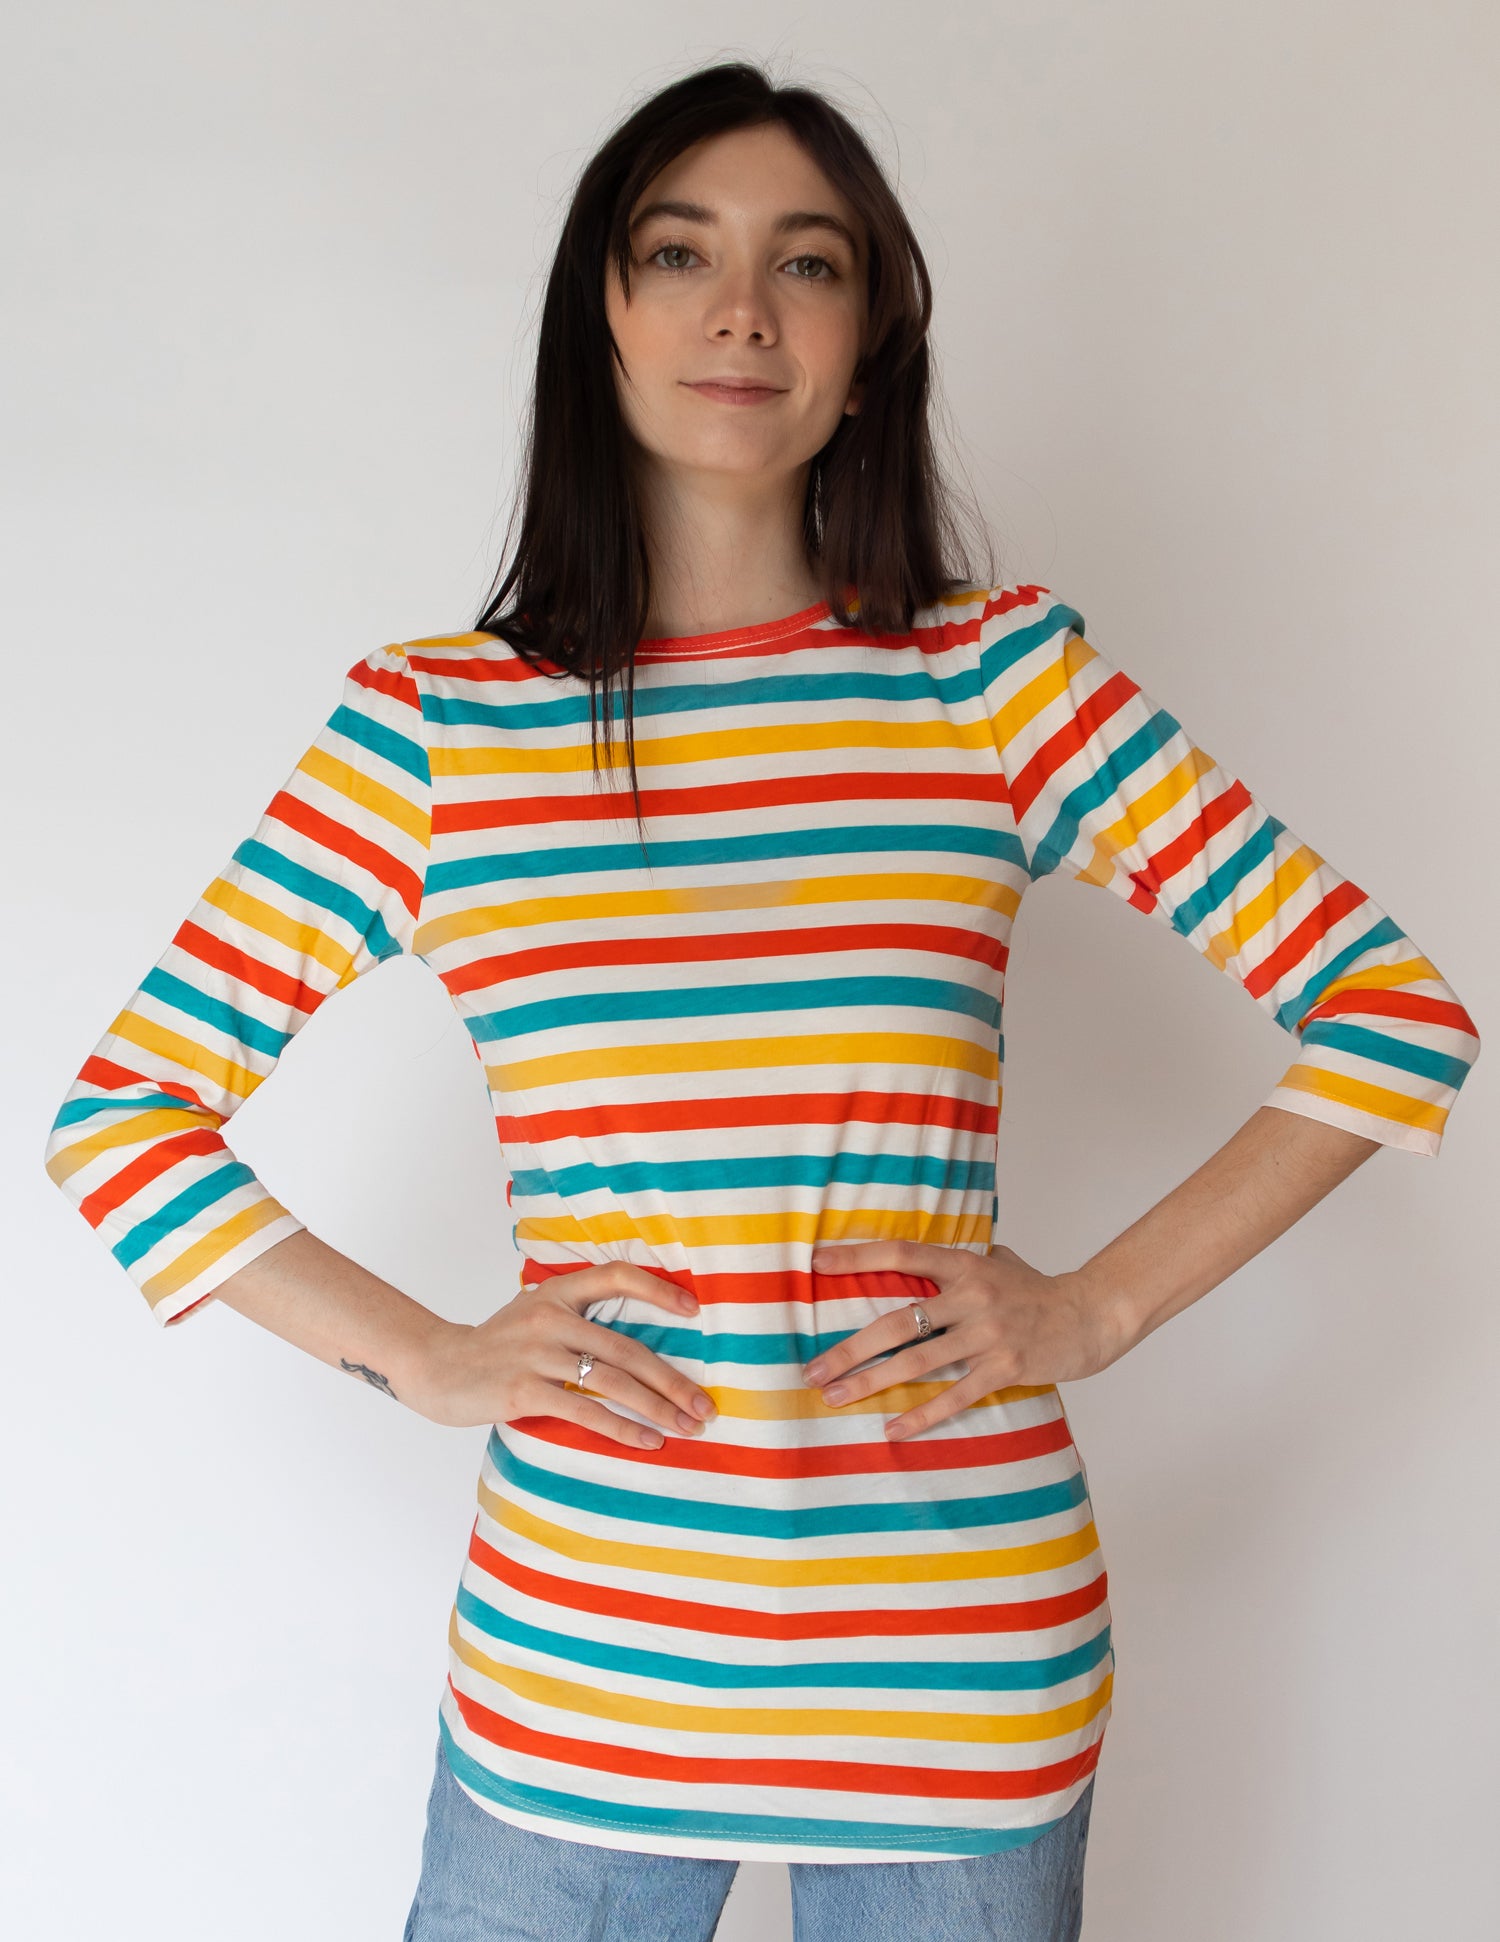 Striped, bright colored 3/4 sleeve tee worn untucked